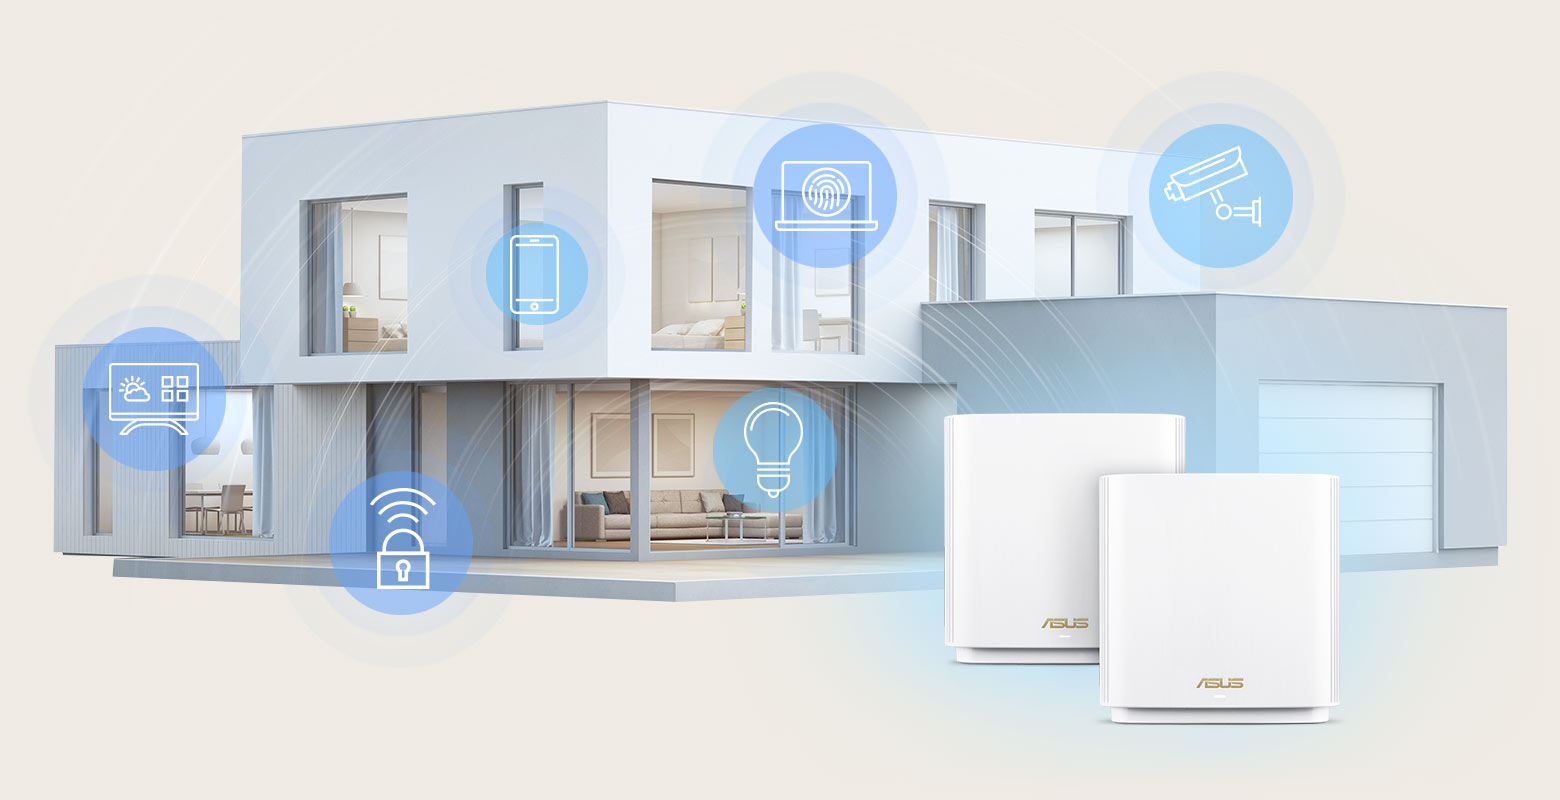 ASUS ZenWiFi ET9 mesh routers offer house-wide WiFi coverage of up to 5700 square feet for you to connect all your IoT home gadgets.